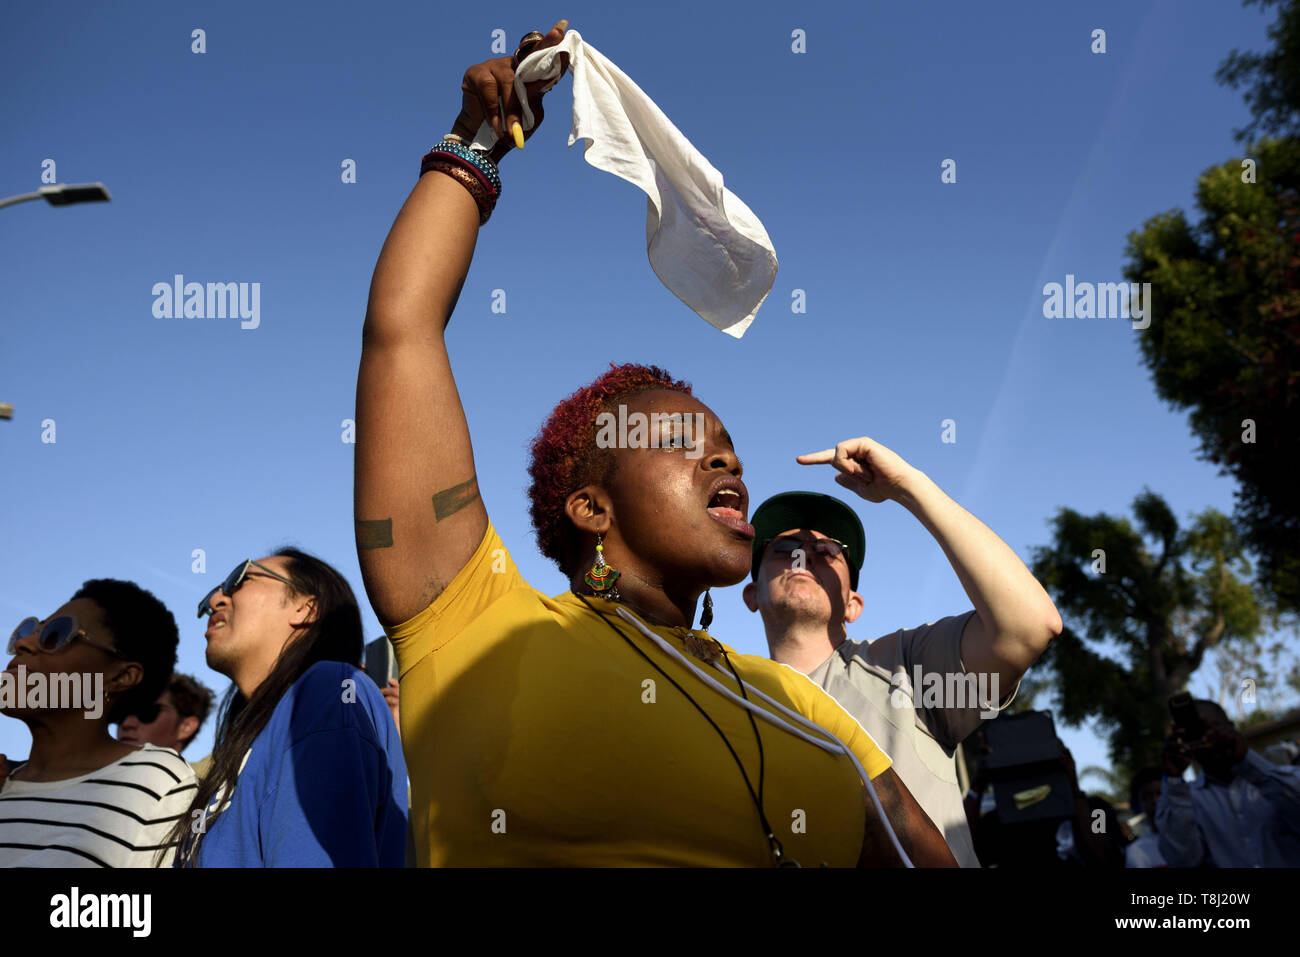 Los Angeles, CA, USA. 4th May, 2019. A woman seen chanting slogans guring the festival.People gather at a festival celebrating the renaming of Rodeo Road to Obama Boulevard, in honor of former US President Barack Obama in Los Angeles, California. Credit: Ronen Tivony/SOPA Images/ZUMA Wire/Alamy Live News Stock Photo